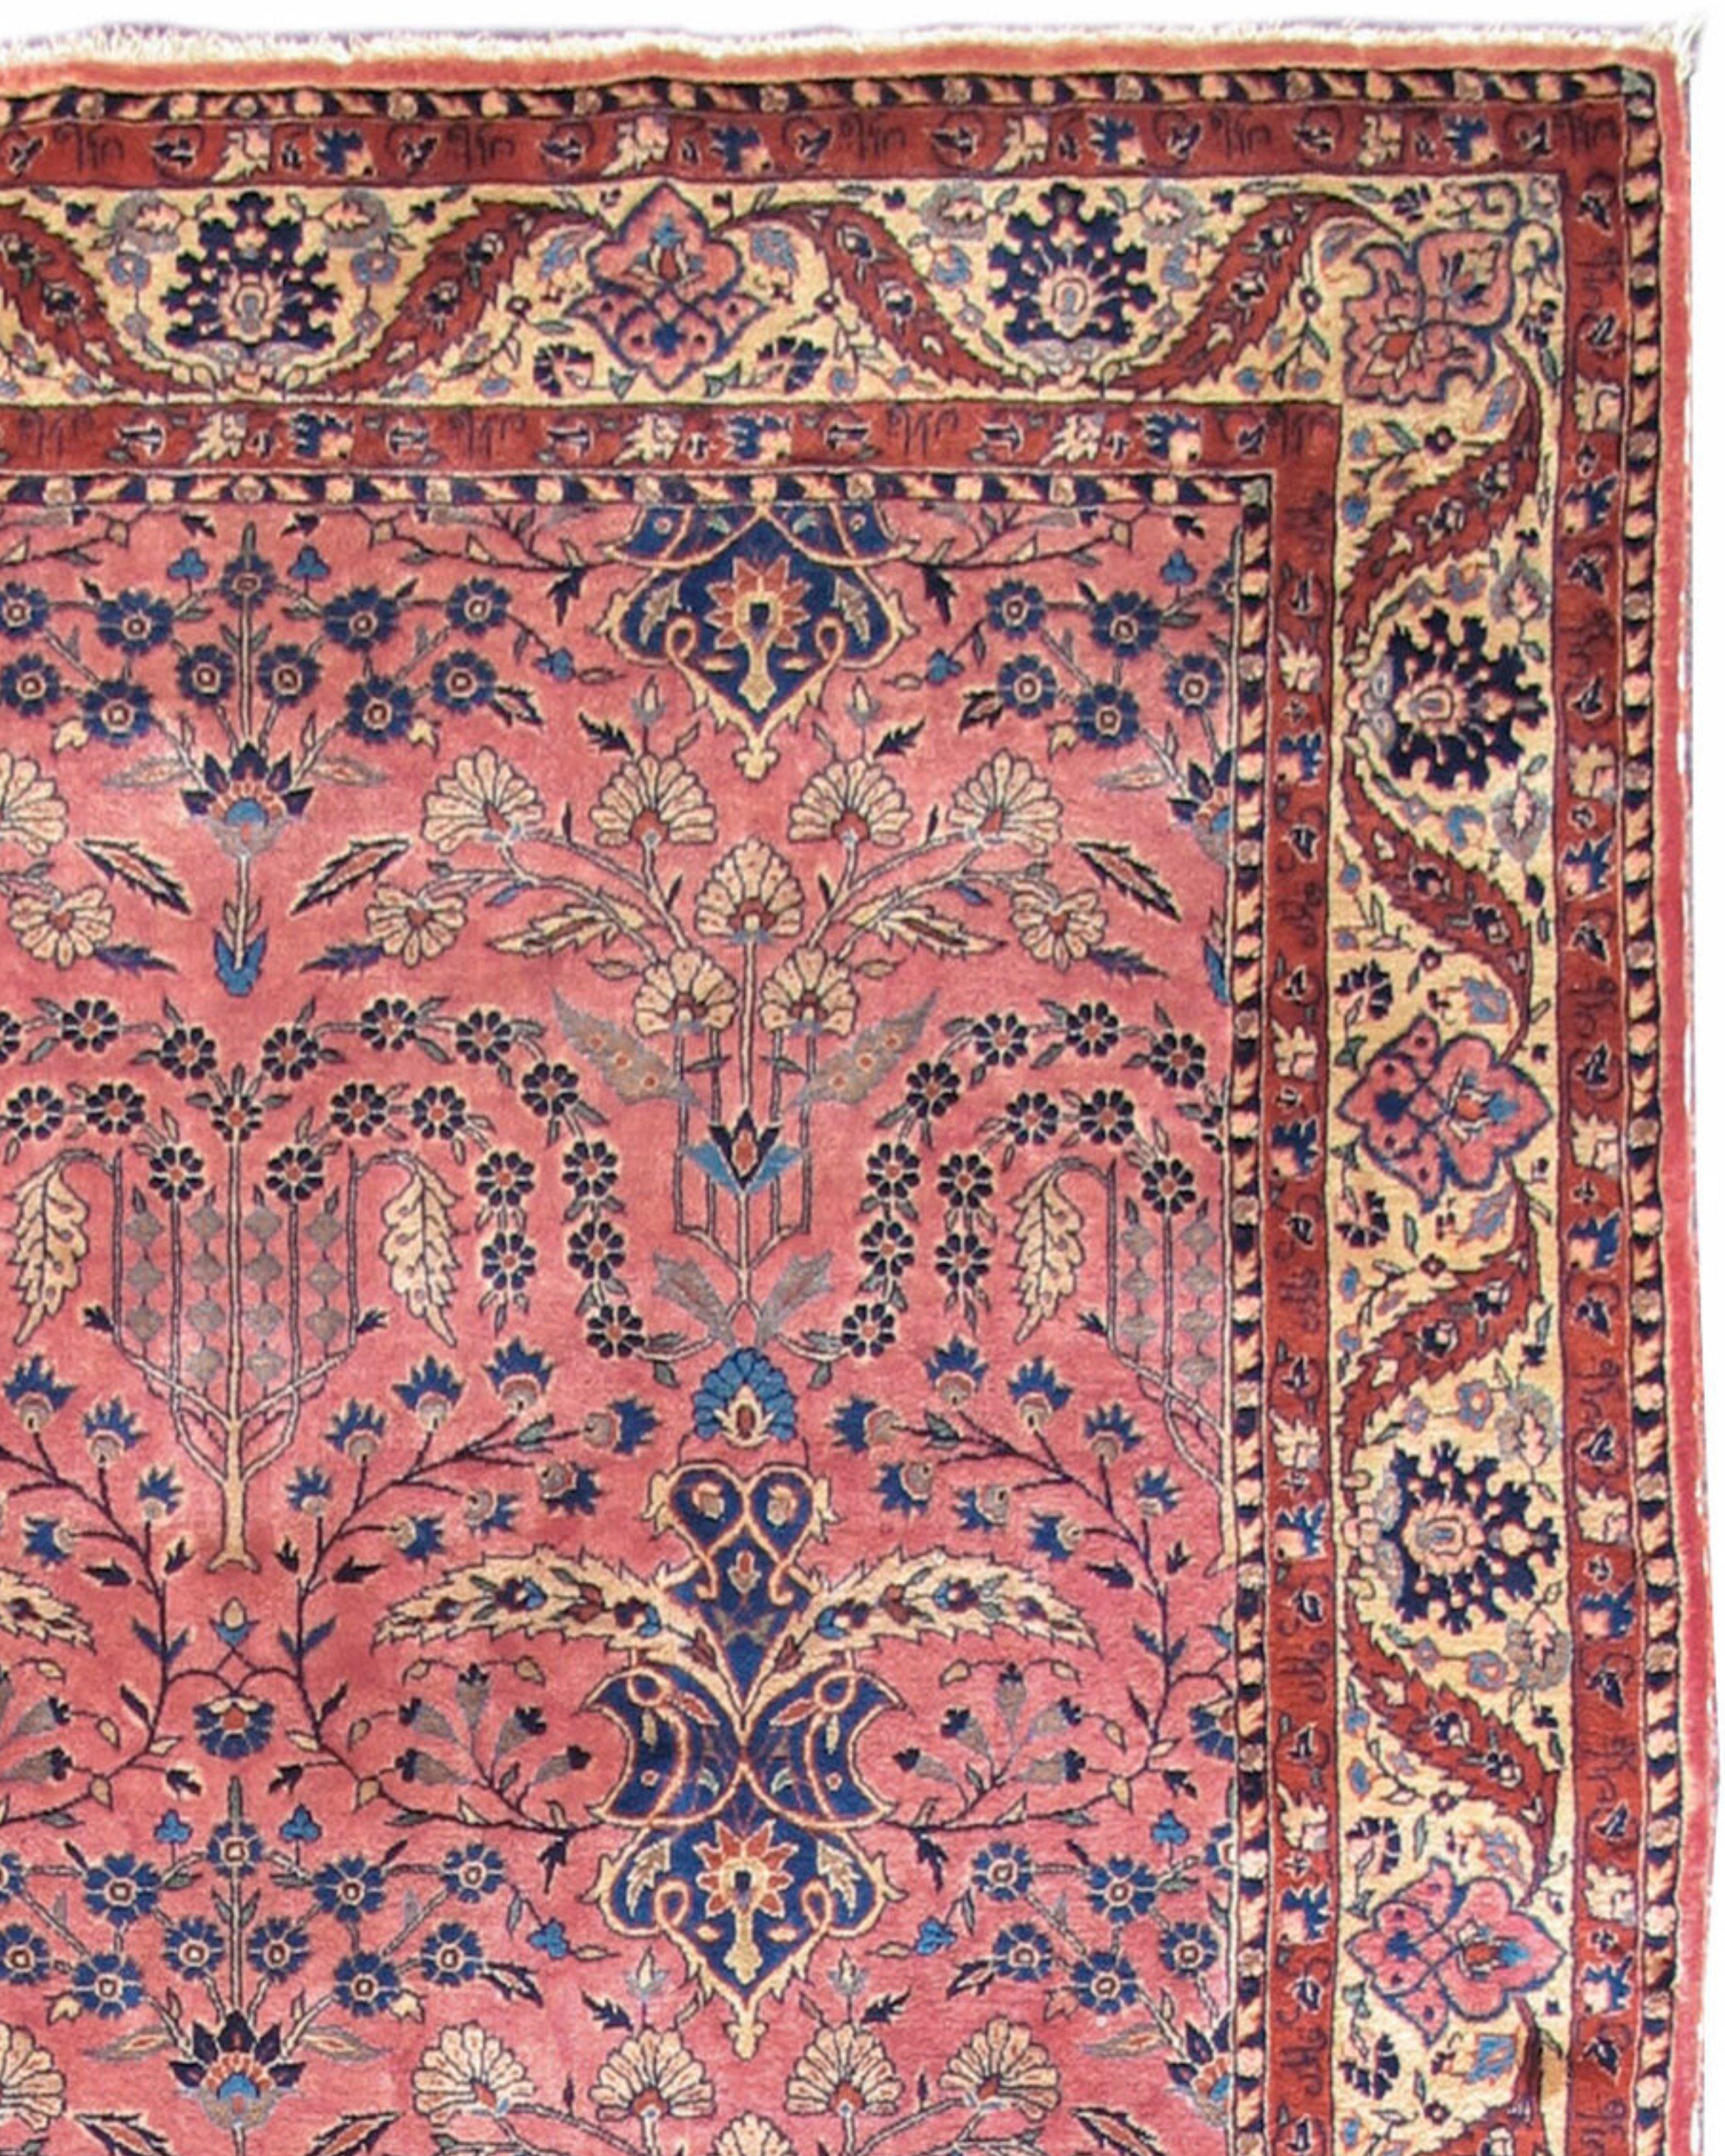 Antique Persian Ghazan Sarouk Rug, c. 1900

Woven with lustrous Manchester wool, this elegant central Persian Ghazan Sarouk rug draws a stylized floral field against a soft rose-red ground. During the early 20th century the soft color palette used